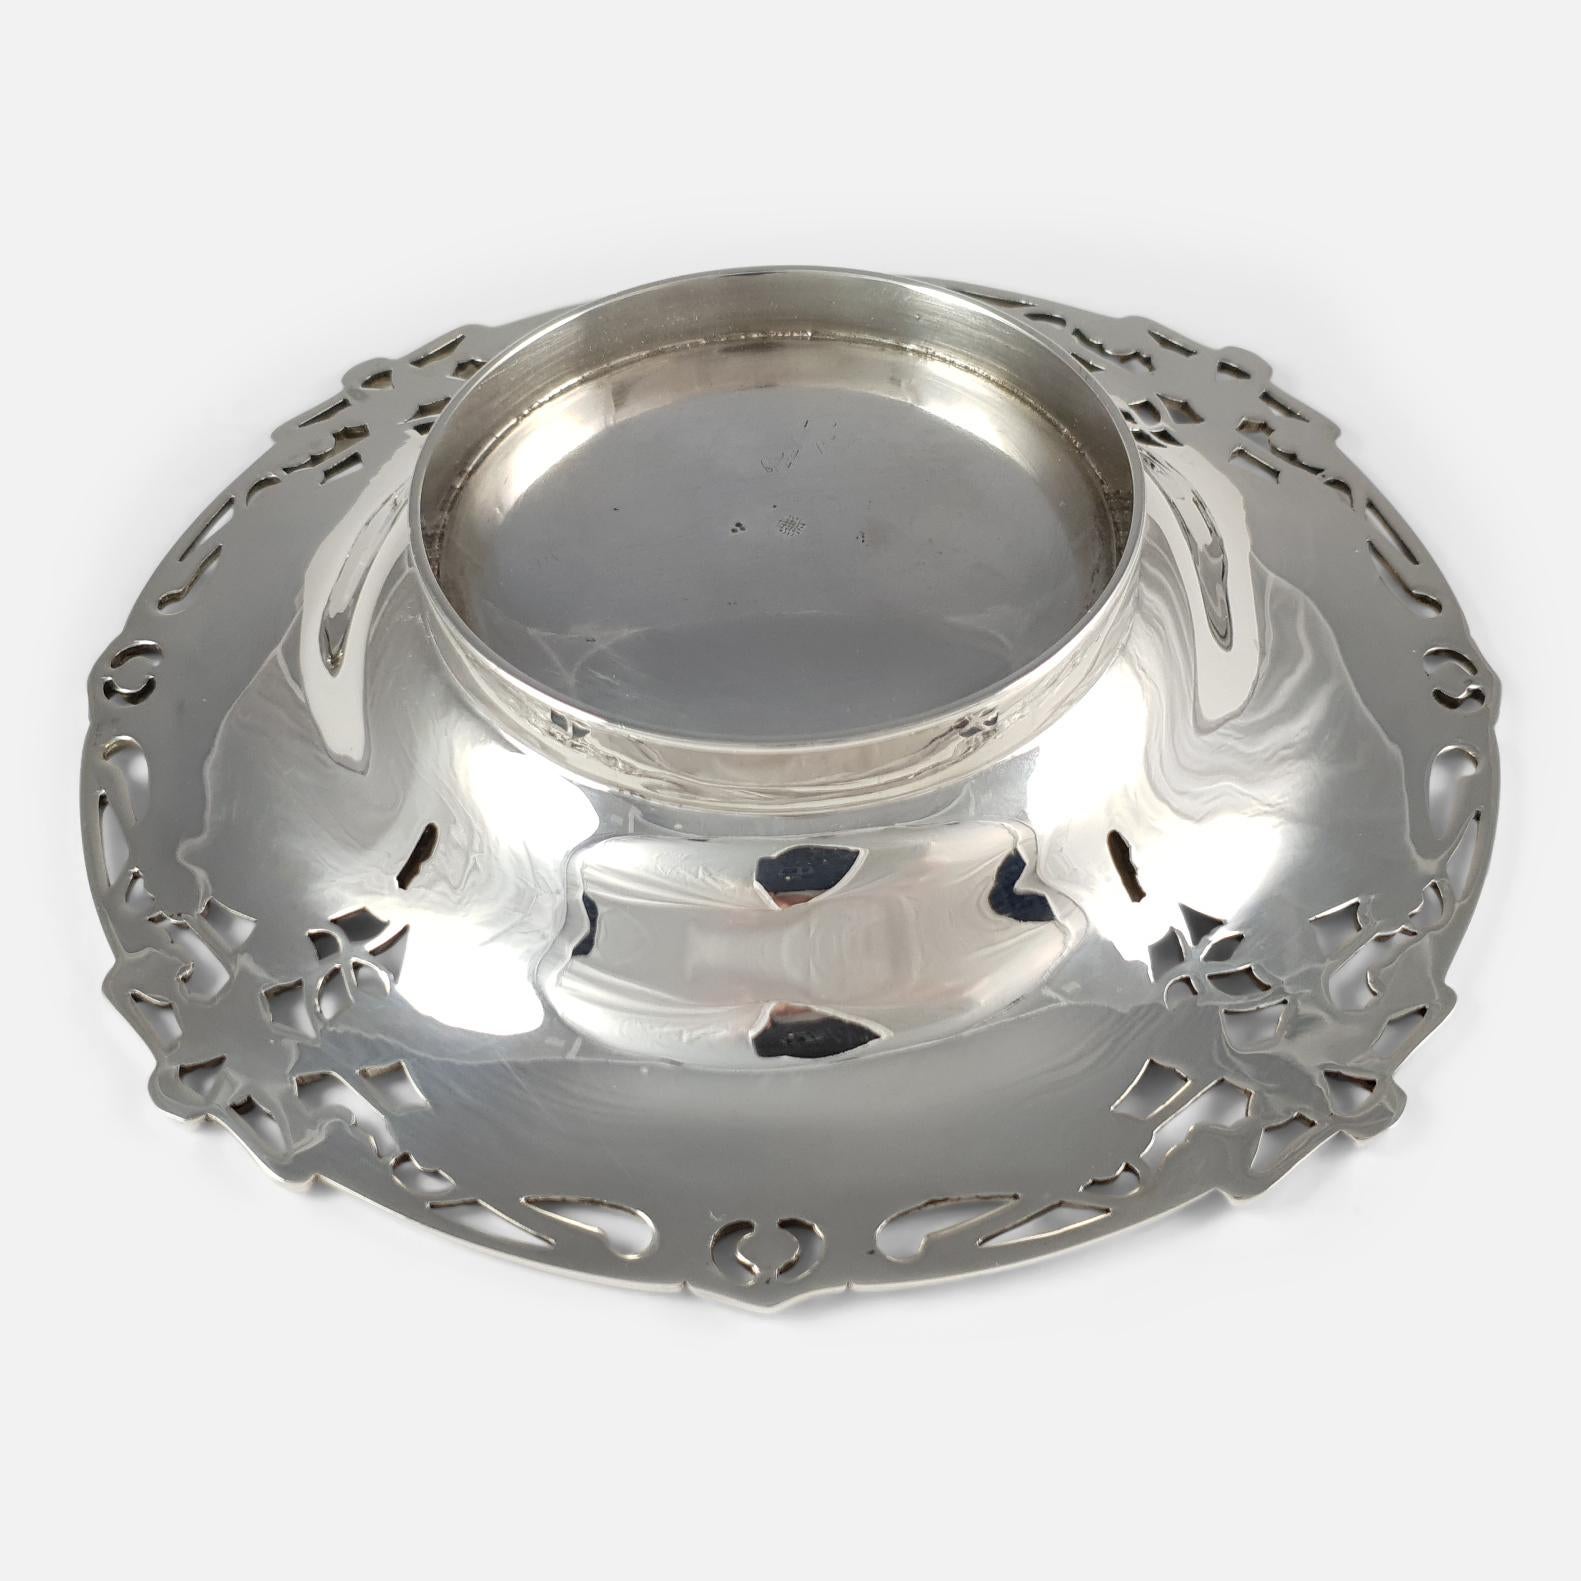 Early 20th Century Art Nouveau Sterling Silver Tazza, William Hutton & Sons, 1906